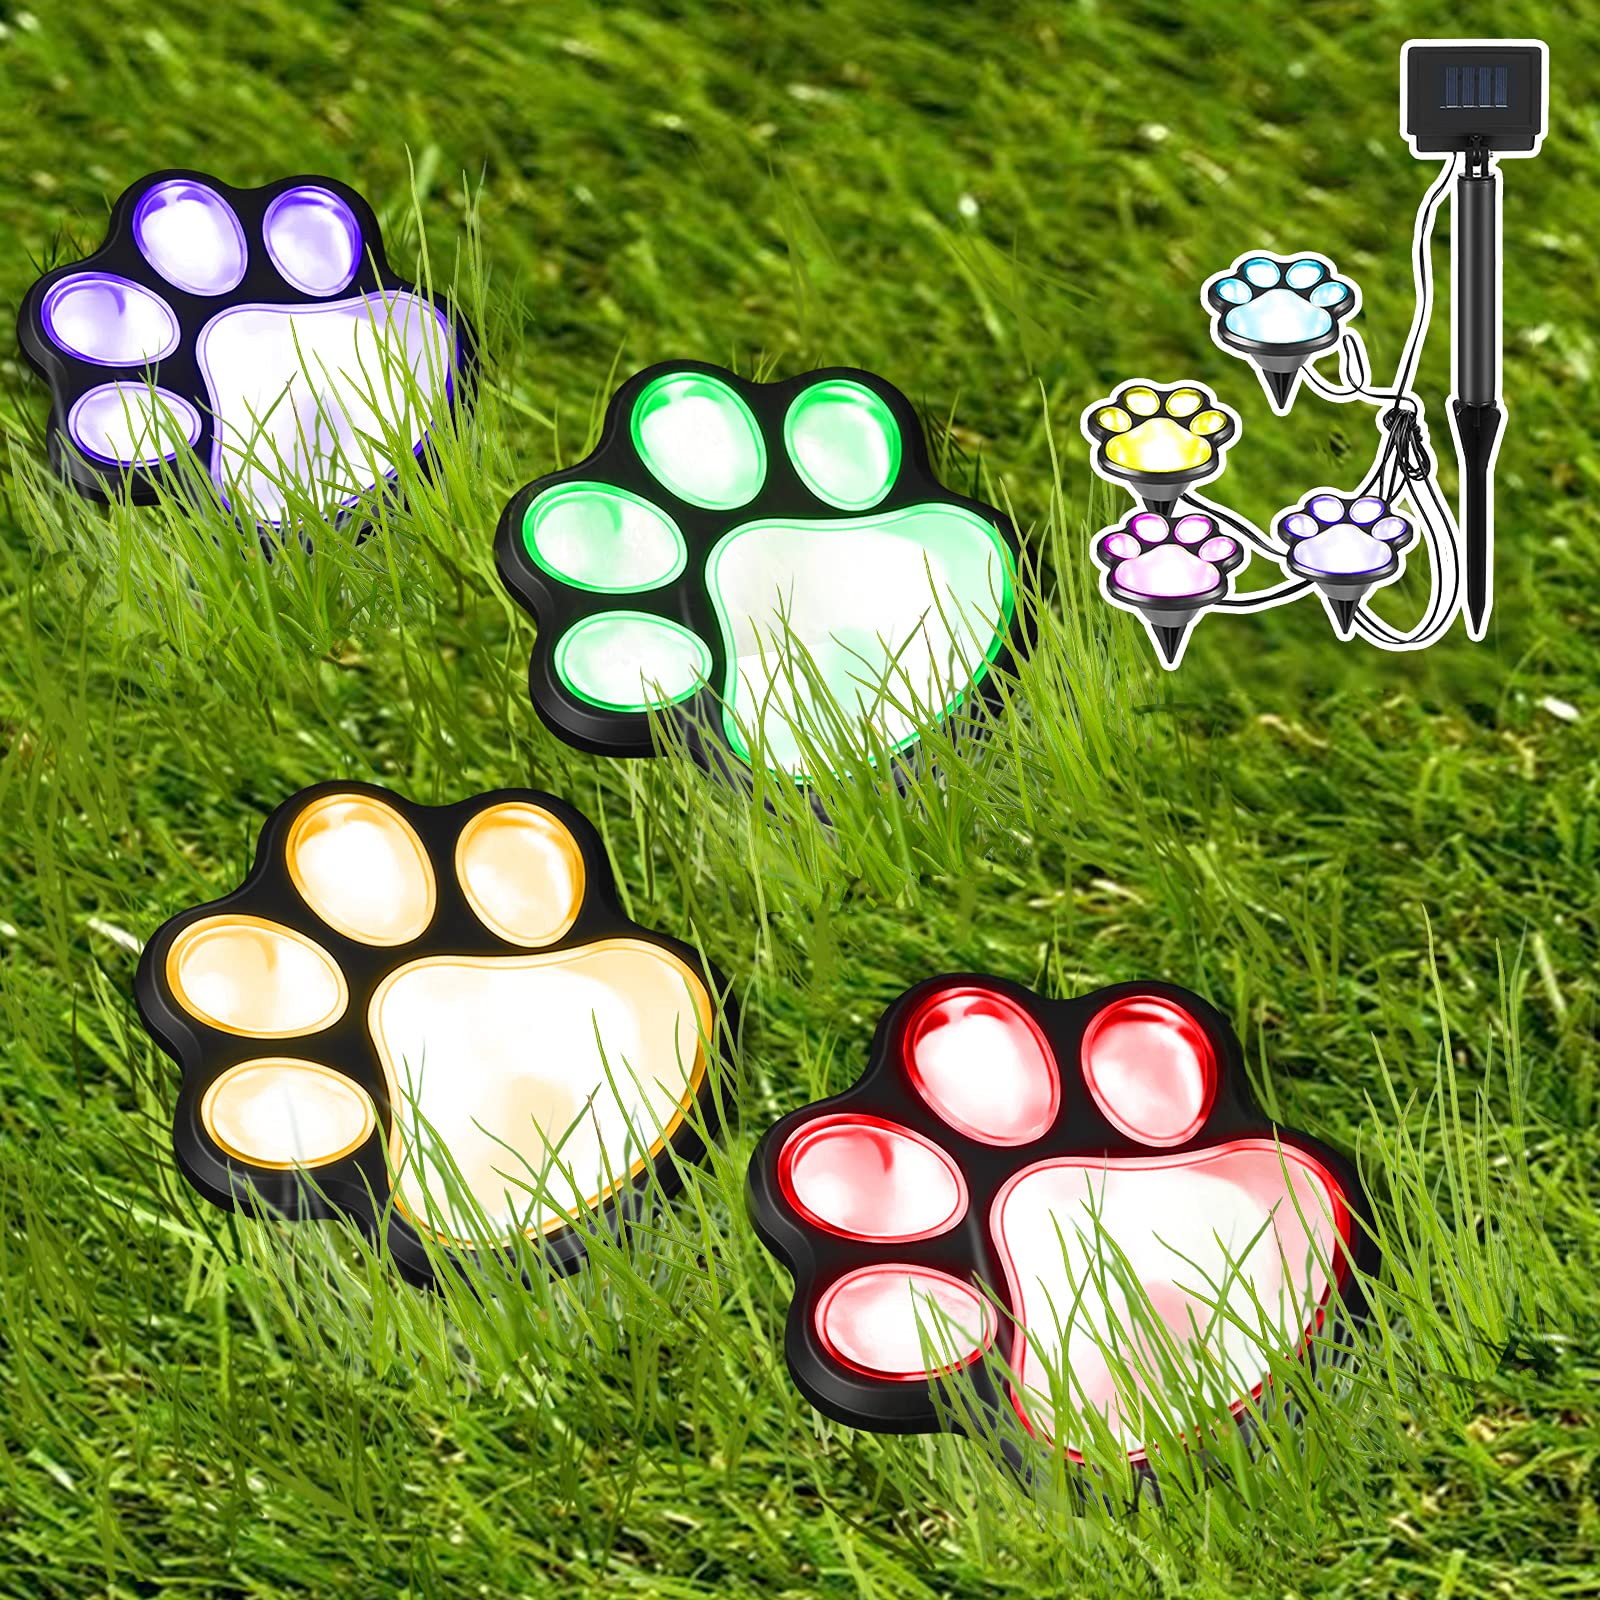 Outdoor LED Paw Solar Decor Lamp (Set of 4) Solar Dog Cat Animal Paw Print Lights for Patio, Yard, Walkway, Garden, Path, Lawn, Yard Lighting, Any Pet Dog Cat Lover (Colorful)